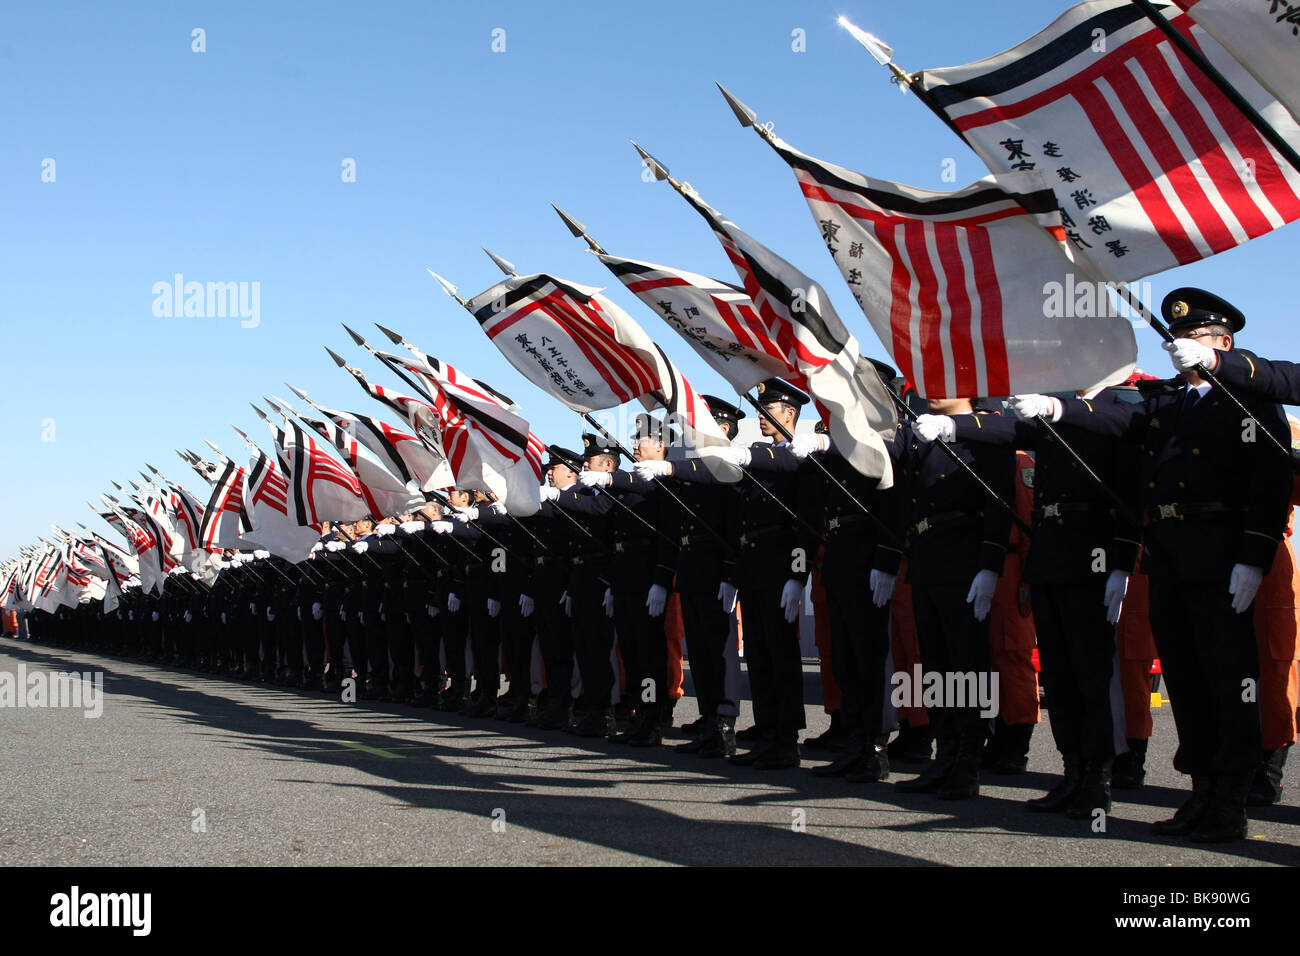 Japan : New Year's Parade of Firemen in Tokyo (2010/01/06) Stock Photo